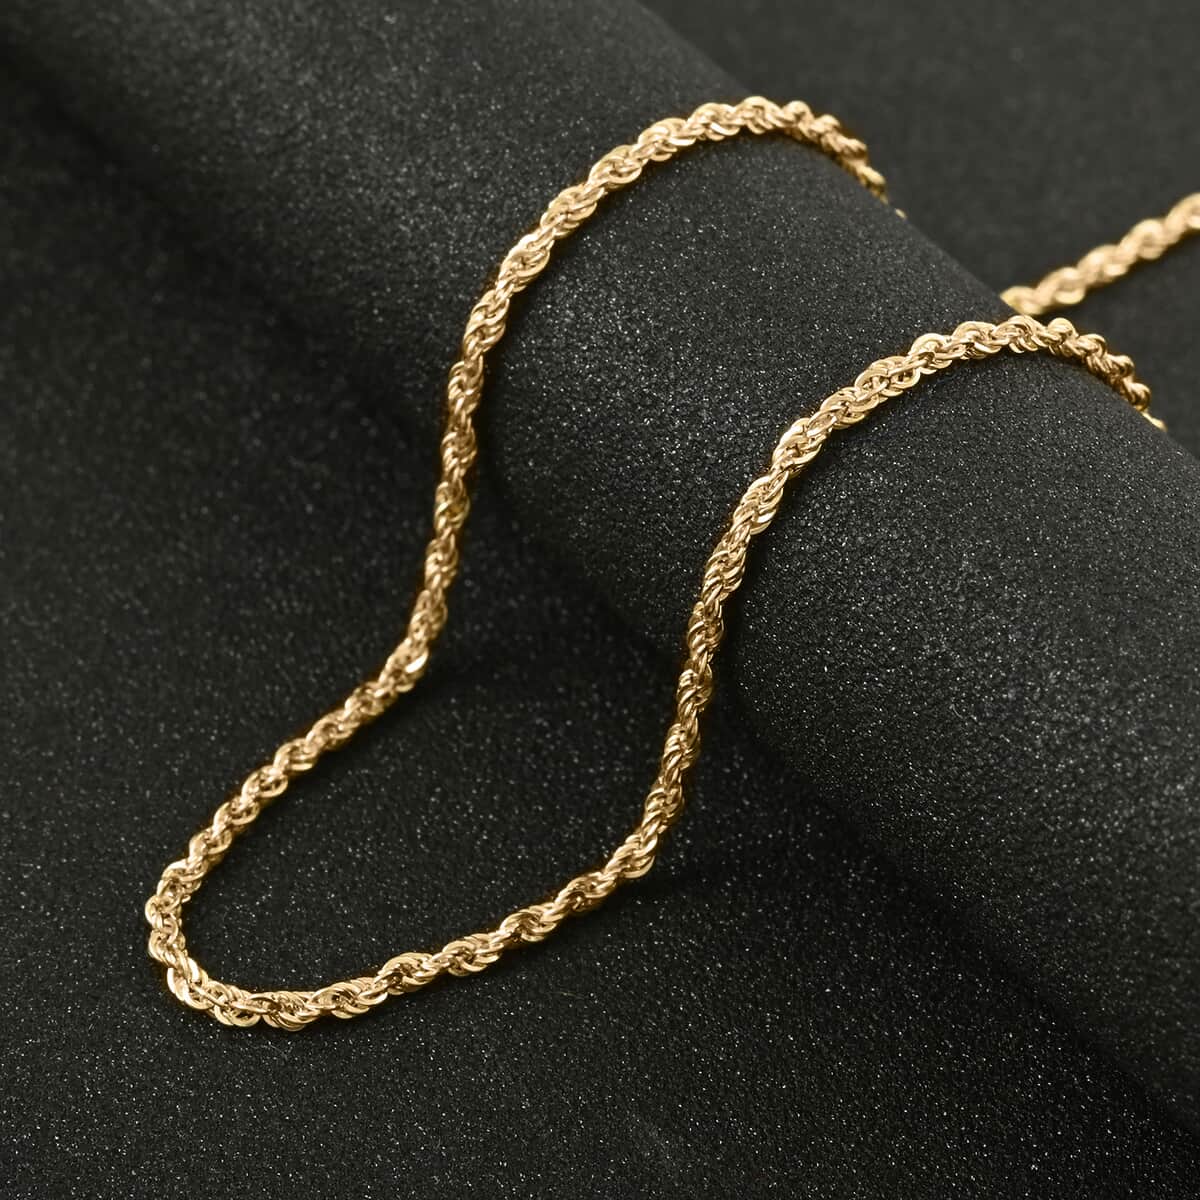 Buy 10K Yellow Gold 5mm Rope Chain Necklace 24 Inches 10.20 Grams